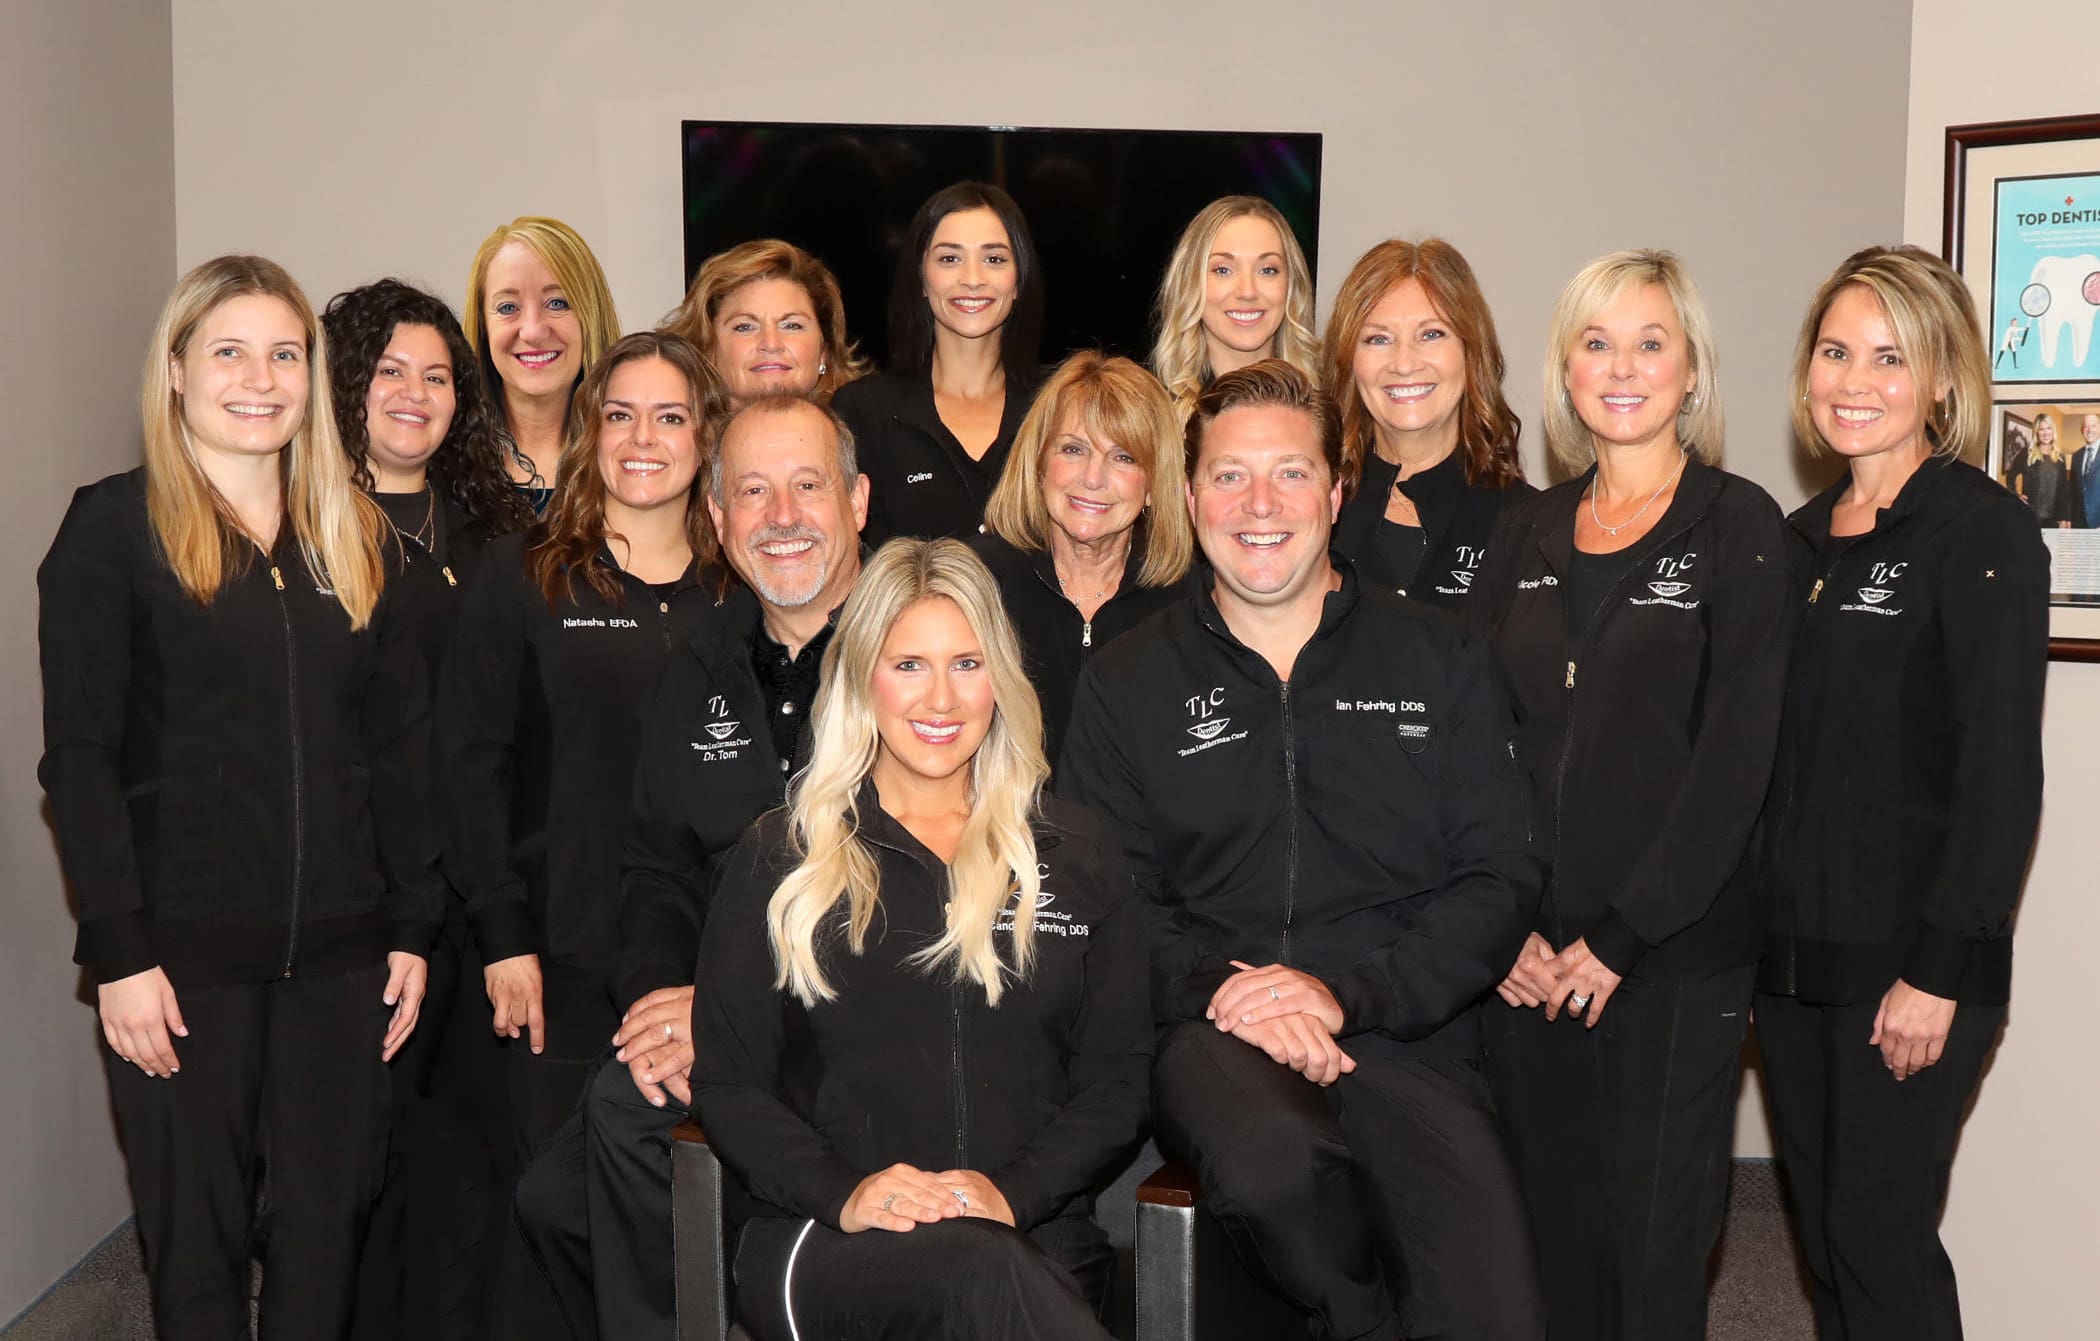 office; Team Leatherman Care Dentistry, Lorain, OH 44053